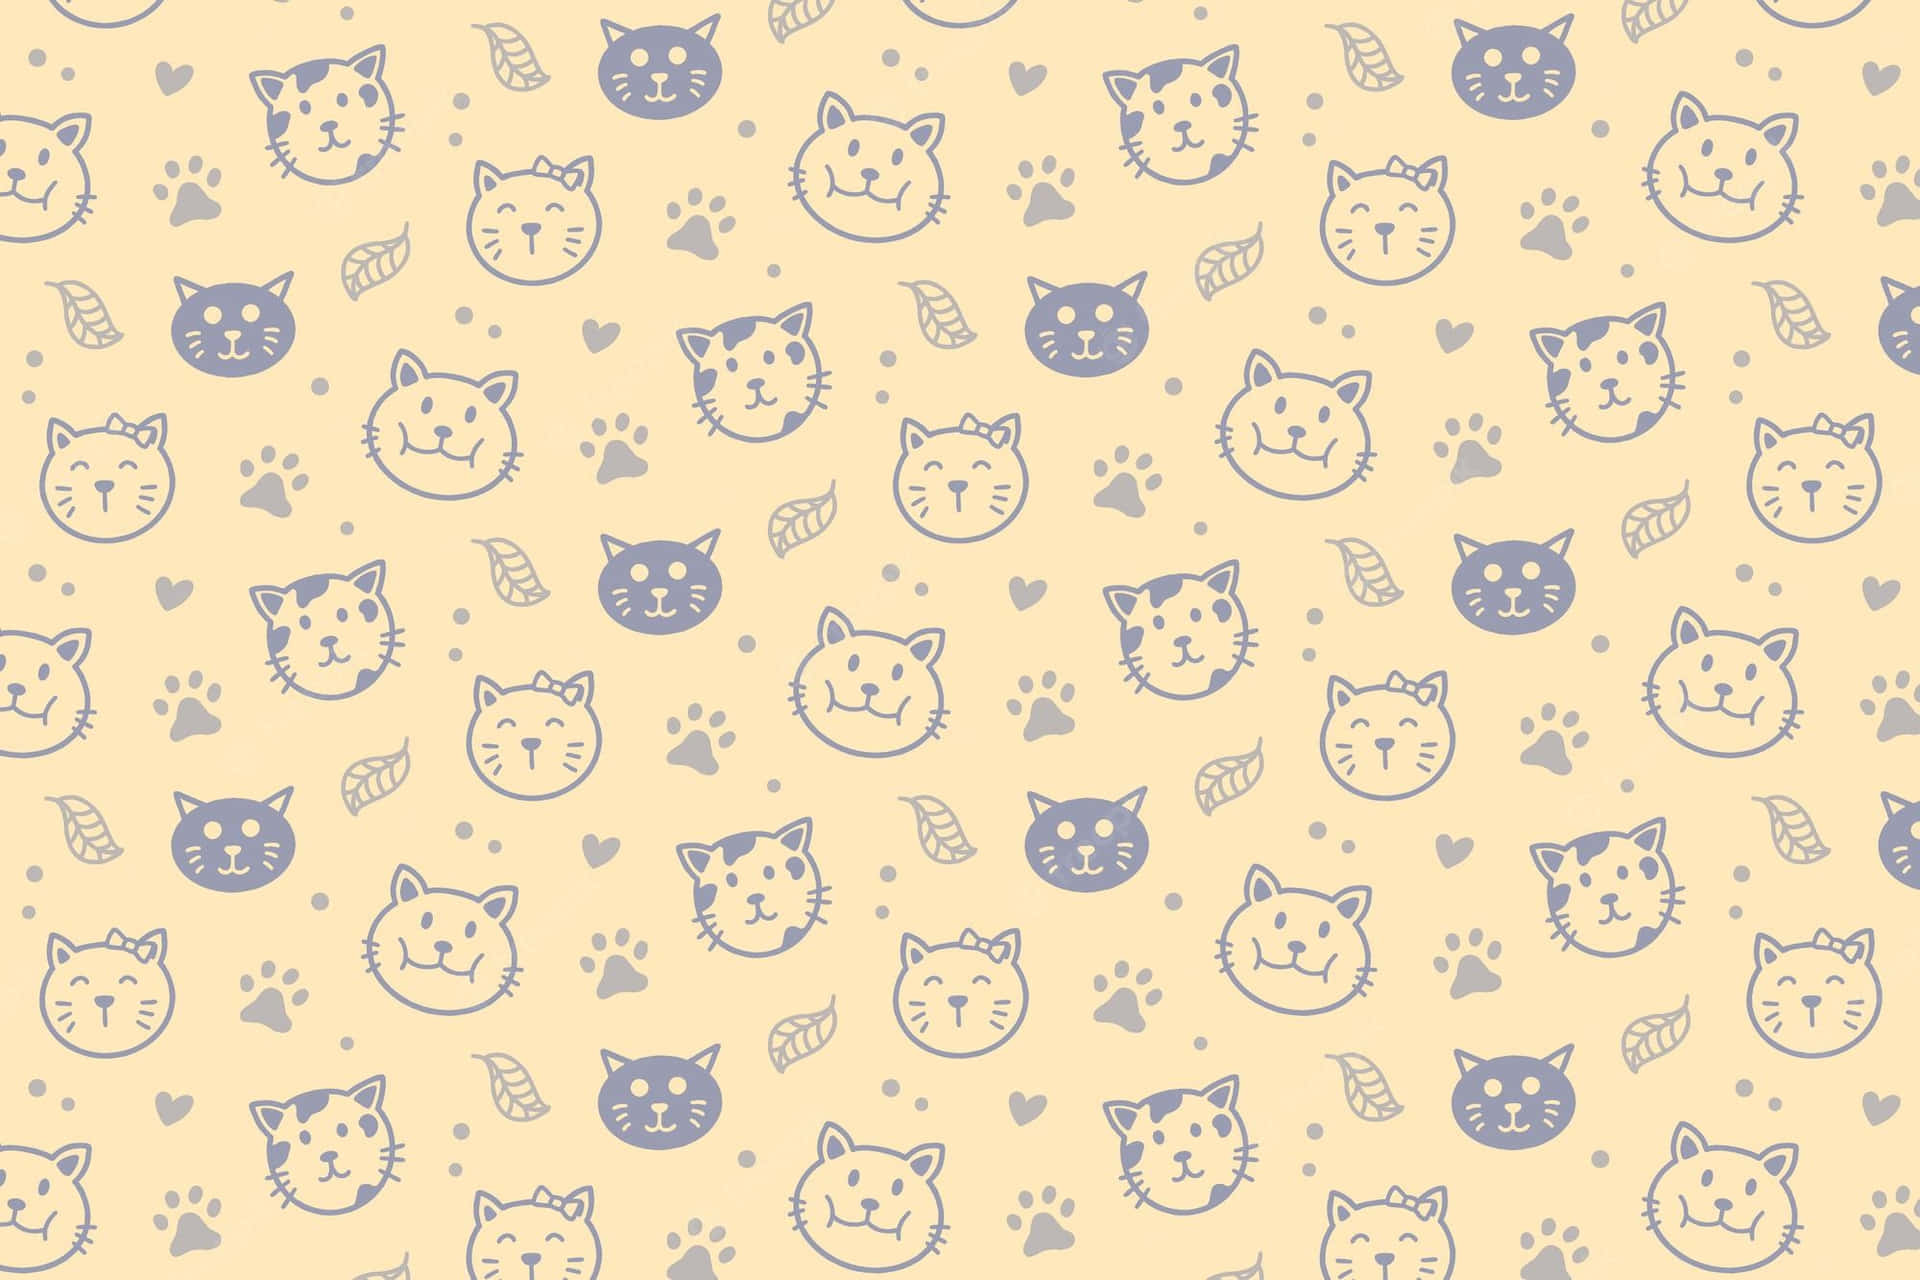 Cat Cuteness Abounds in This Adorable Pattern Wallpaper